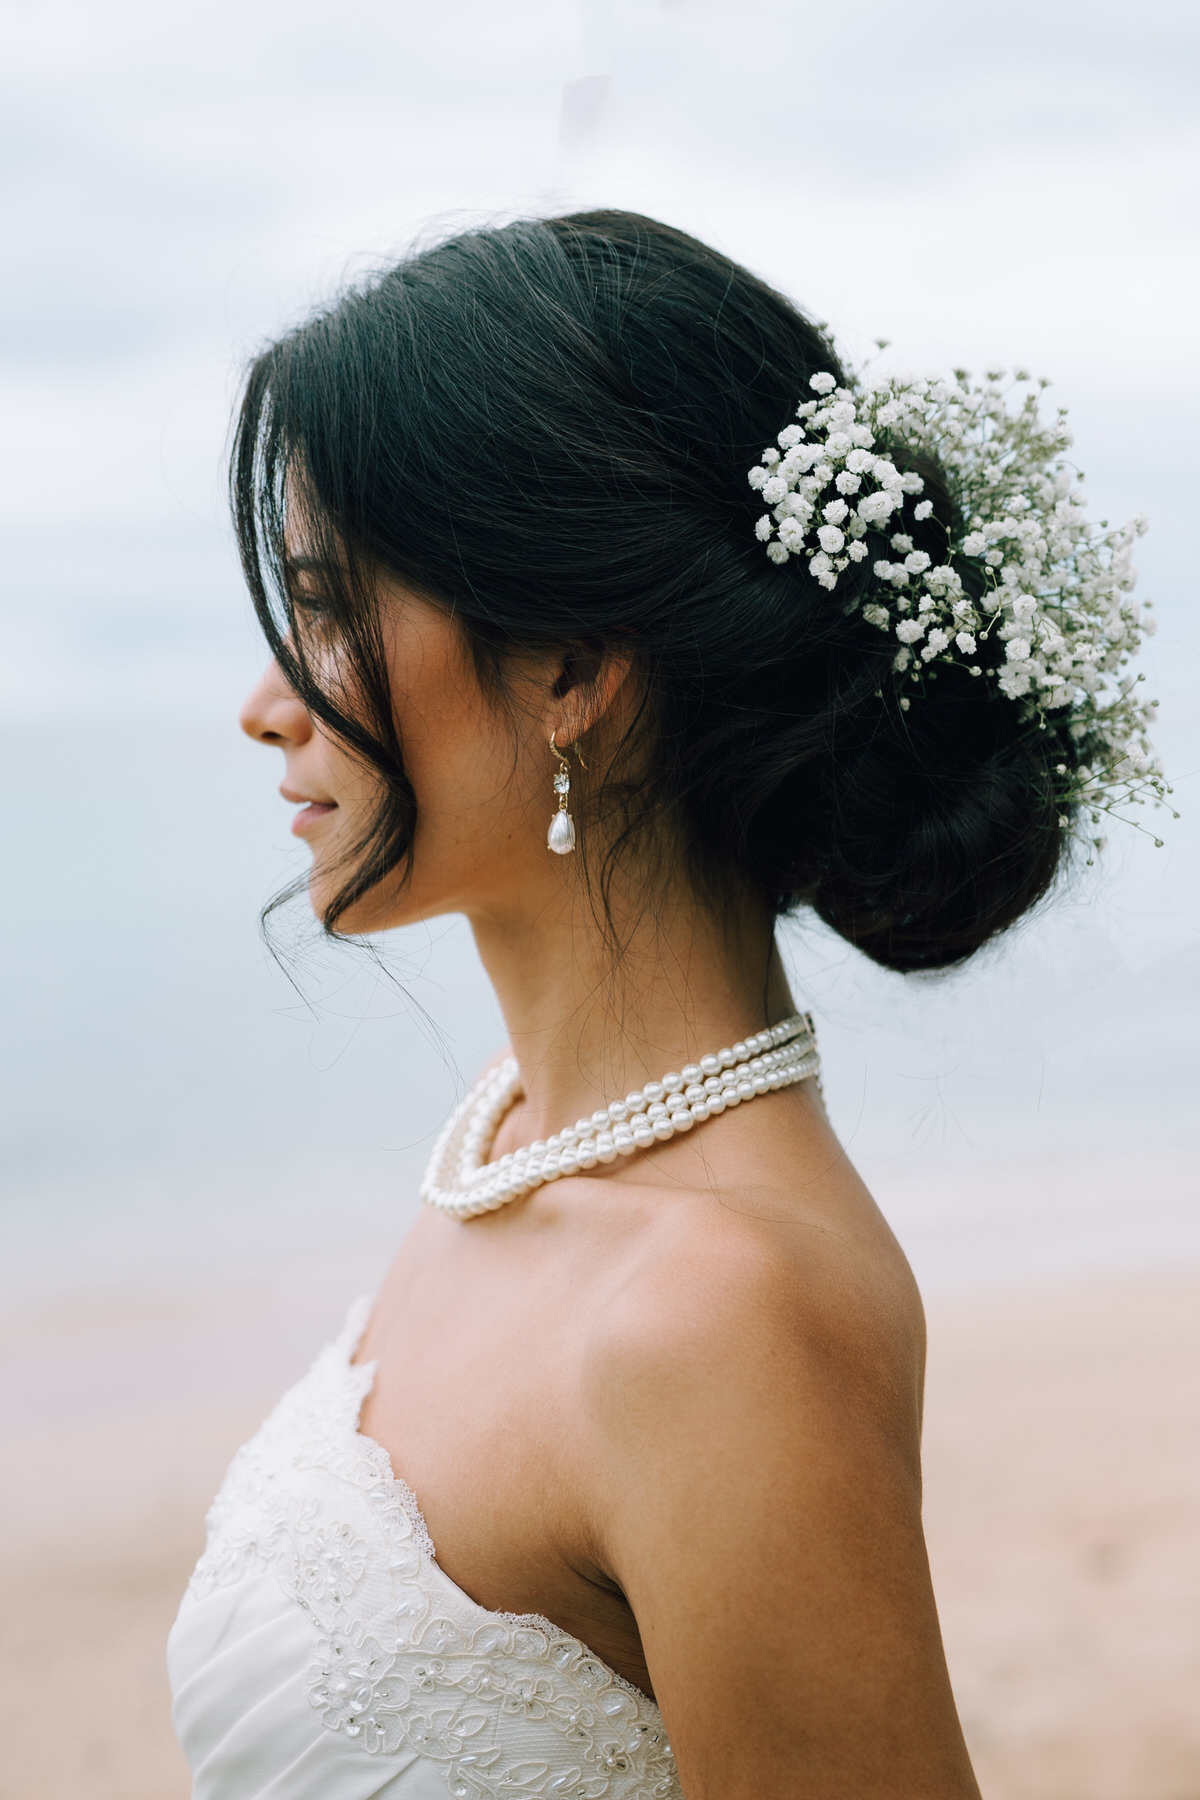 Bridal details with babies breath florals and pearls.